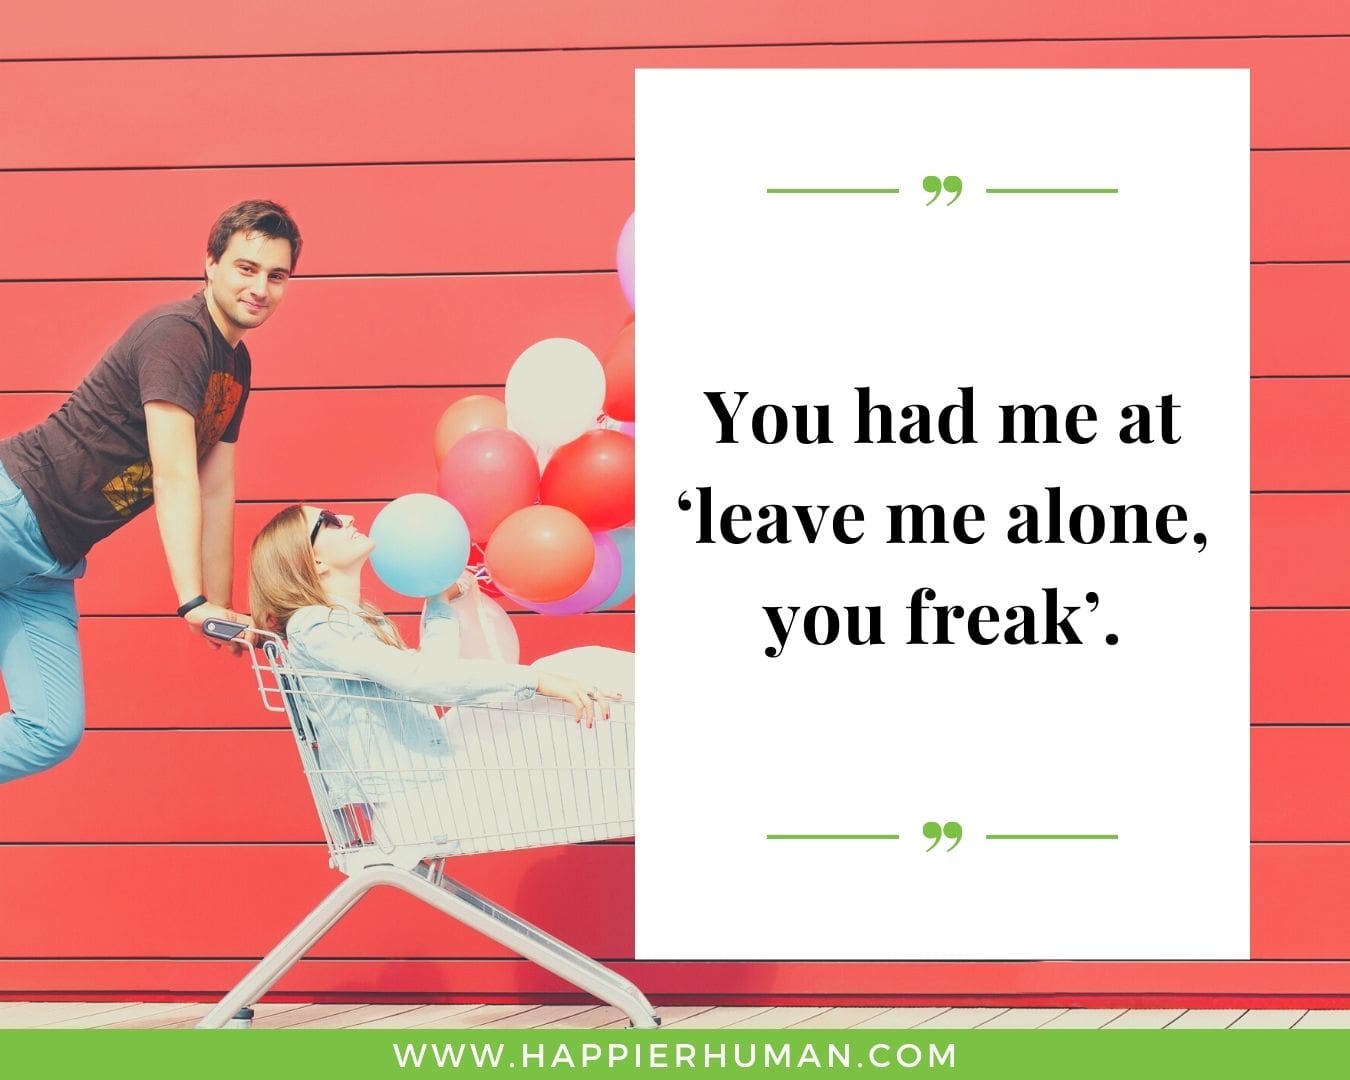 Funny Love Quotes for Her - “You had me at ‘leave me alone, you freak’.”